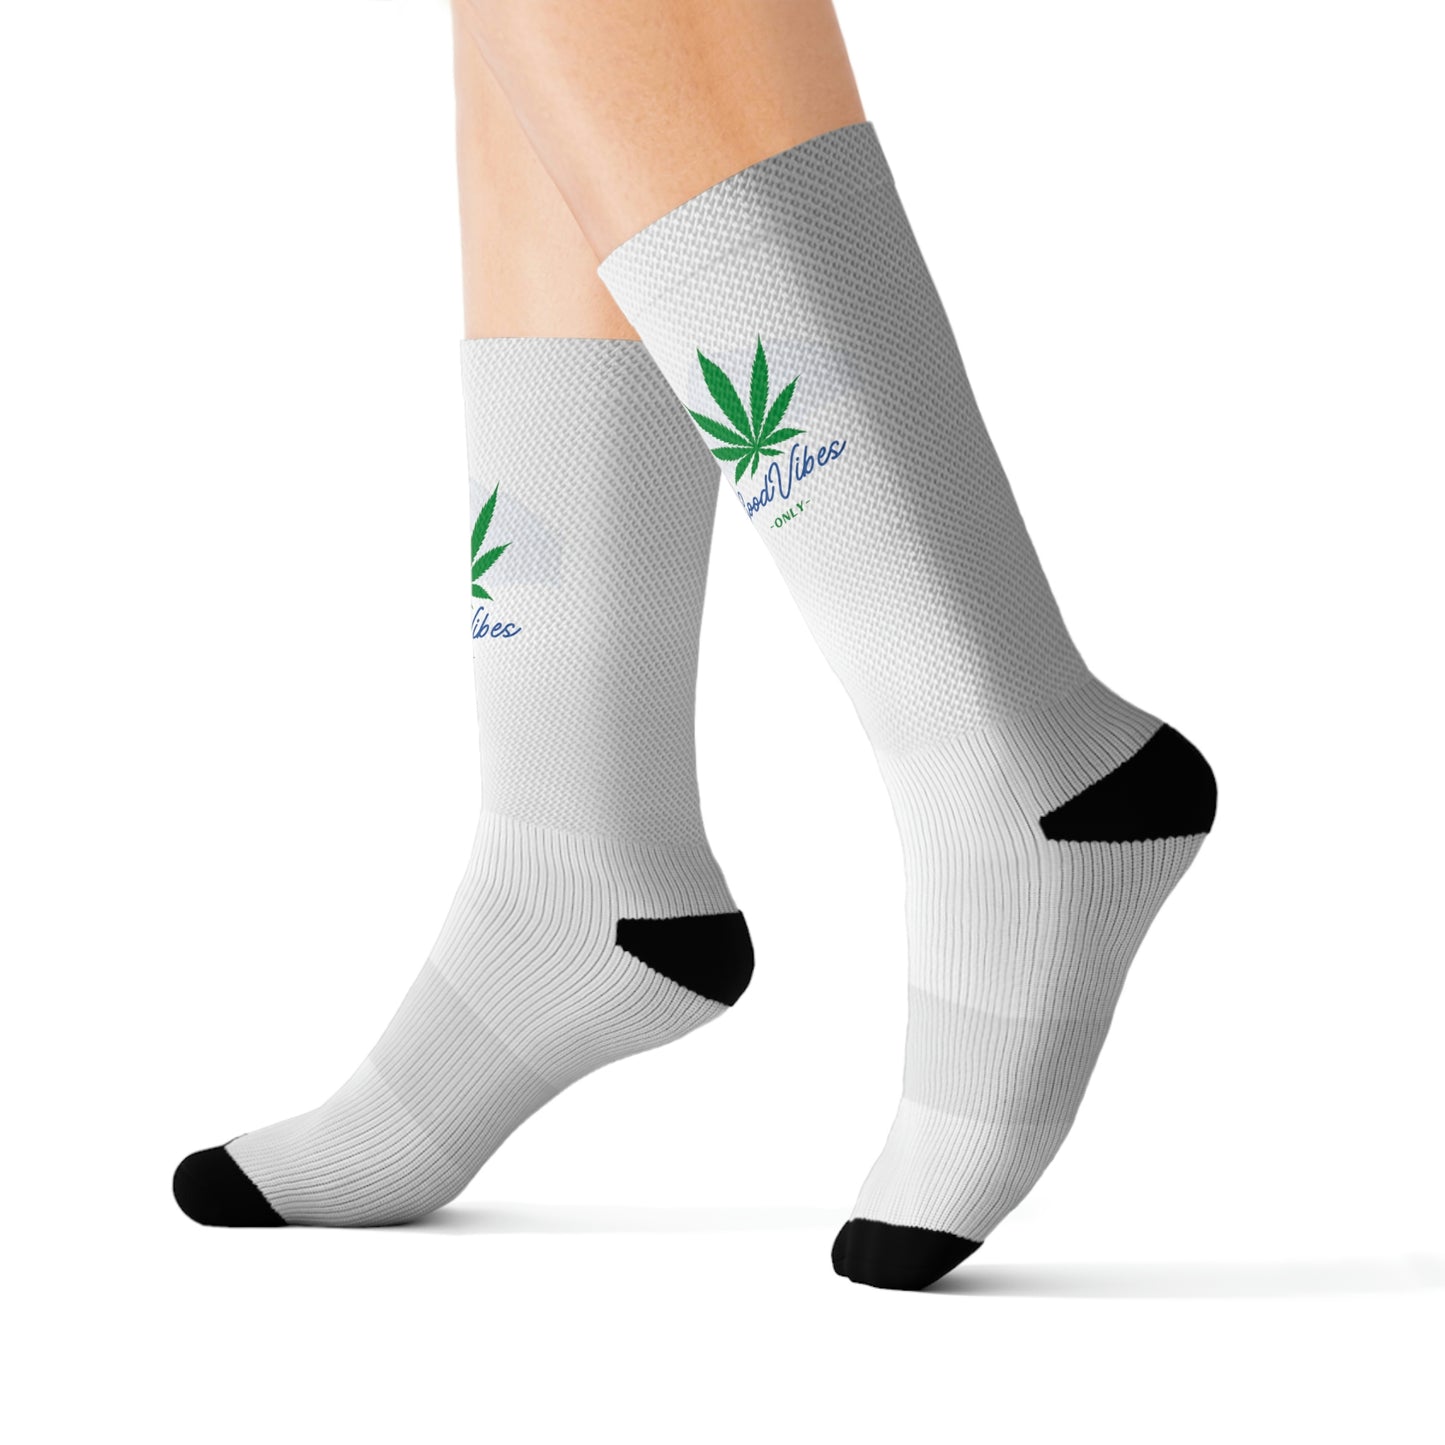 A closeup of a person wearing black and white pot socks that show a green cannabis leaf on the top front of the sock with the words that read "Good Vibes" in blue and reads "Only" in green under good vibes